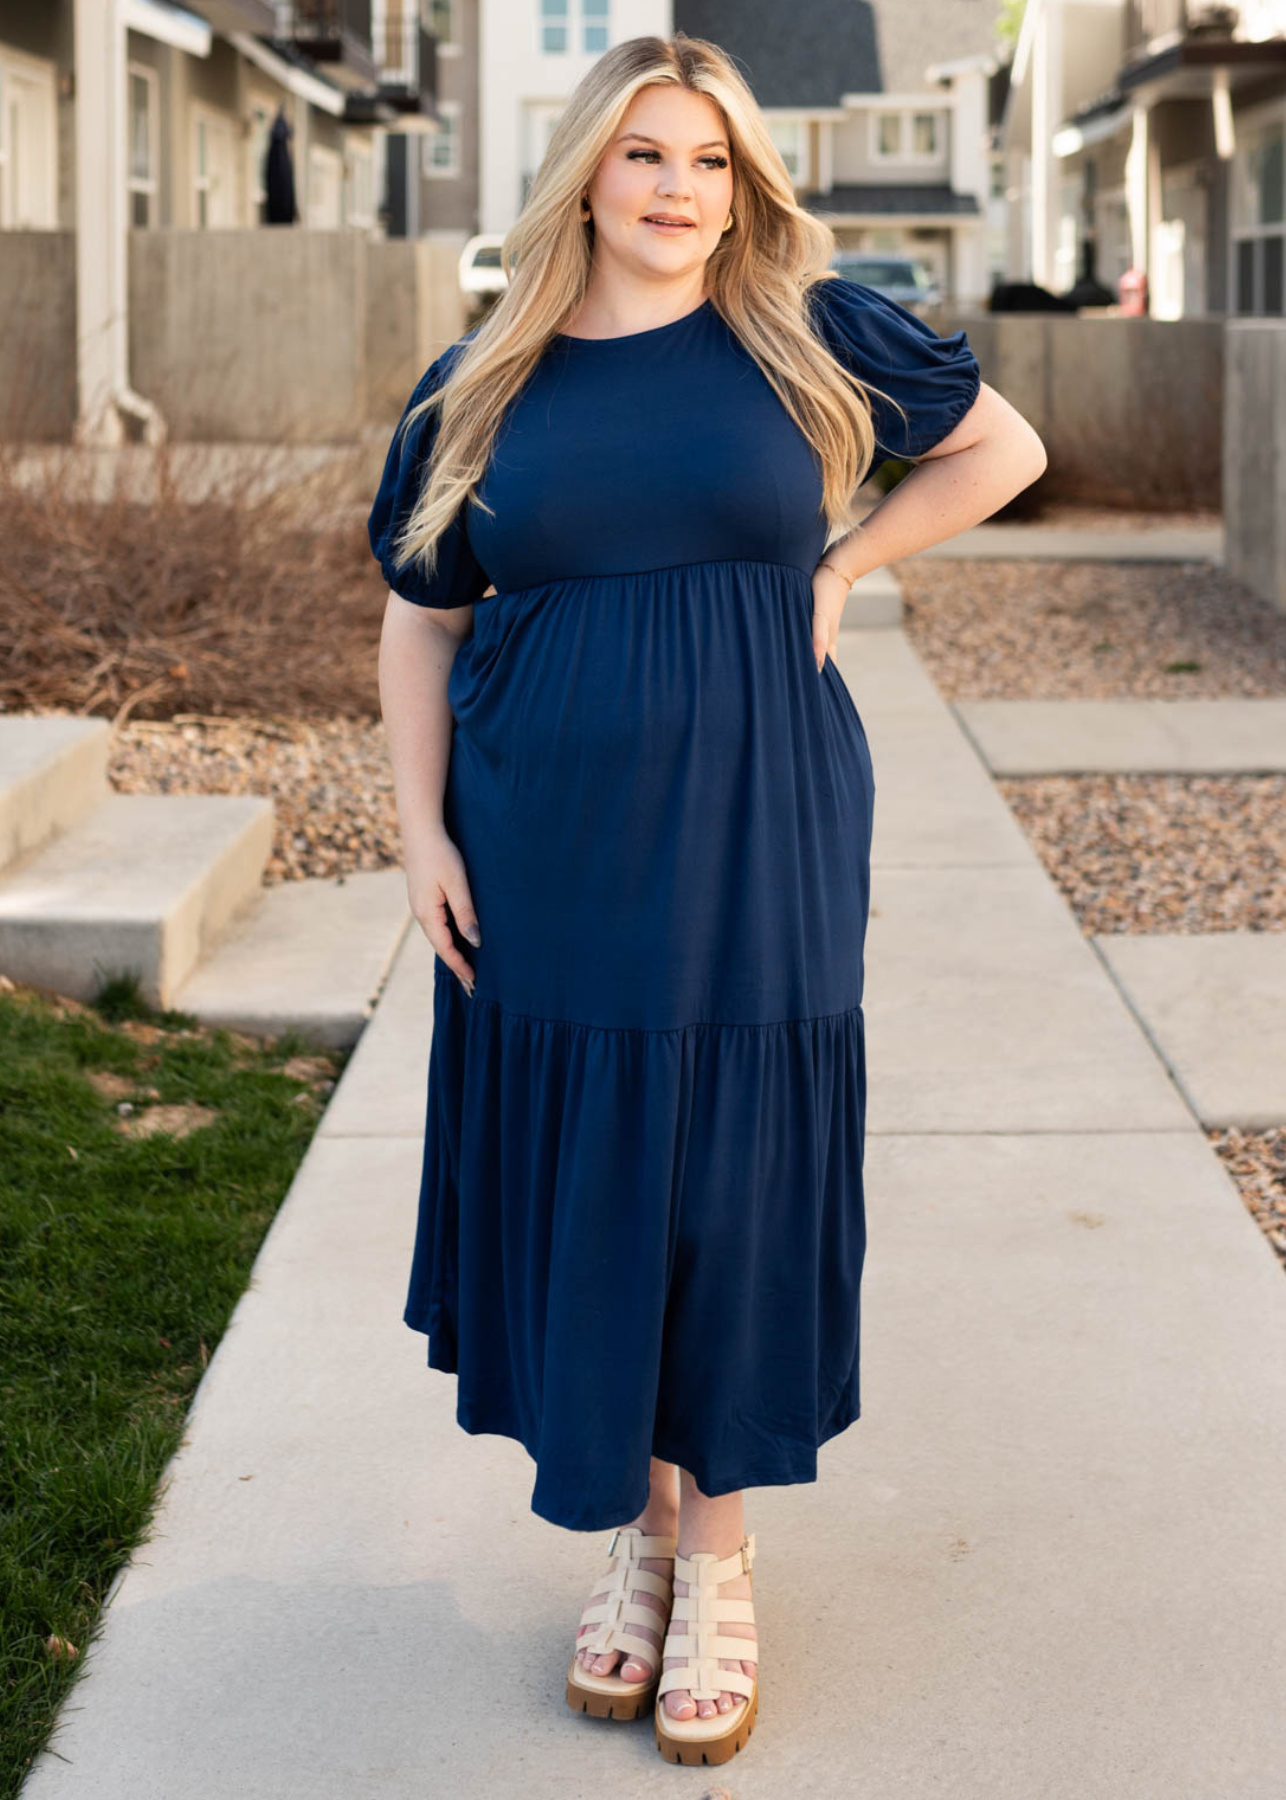 Short sleeve plus size navy tiered dress